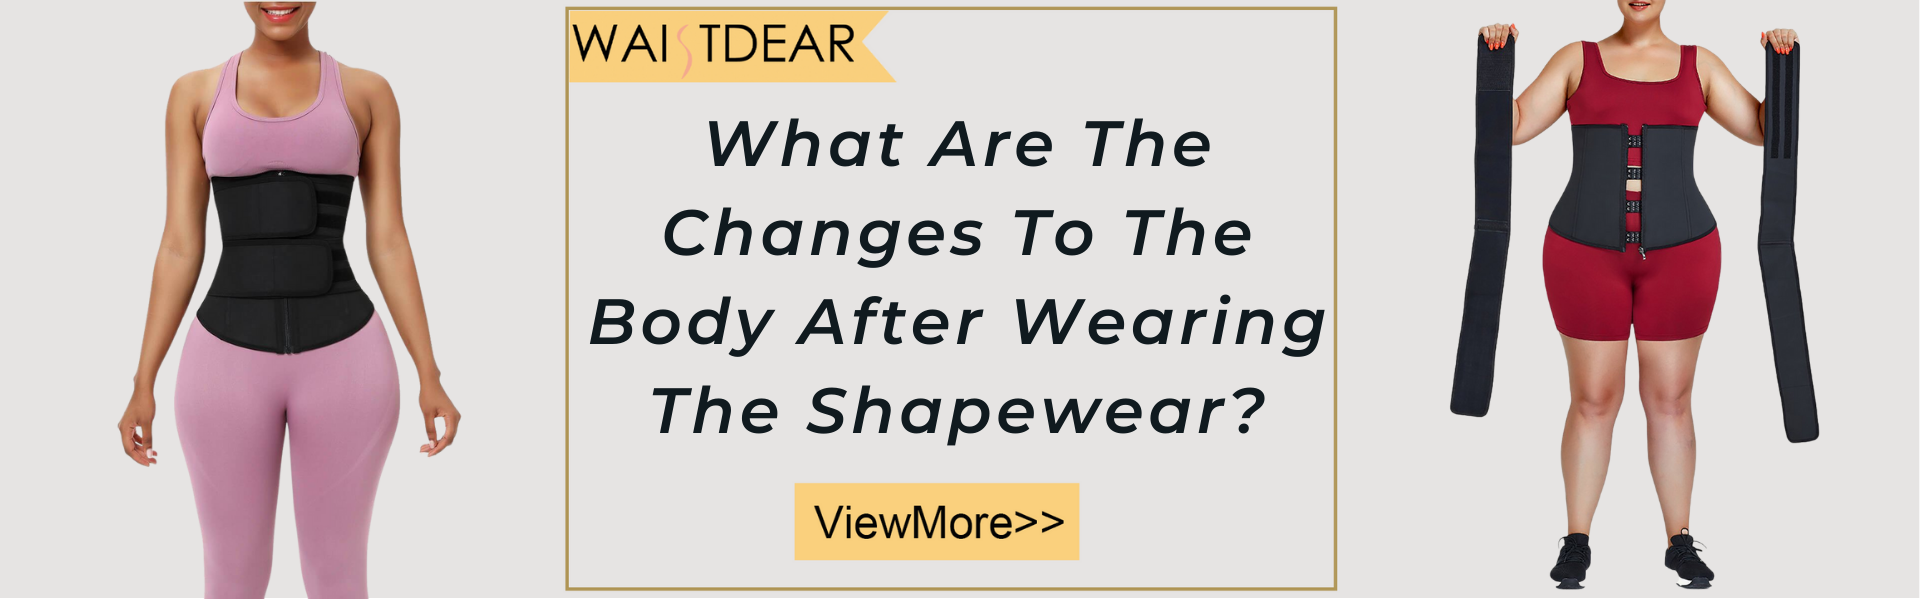 What Are The Changes To The Body After Wearing The Shapewear?